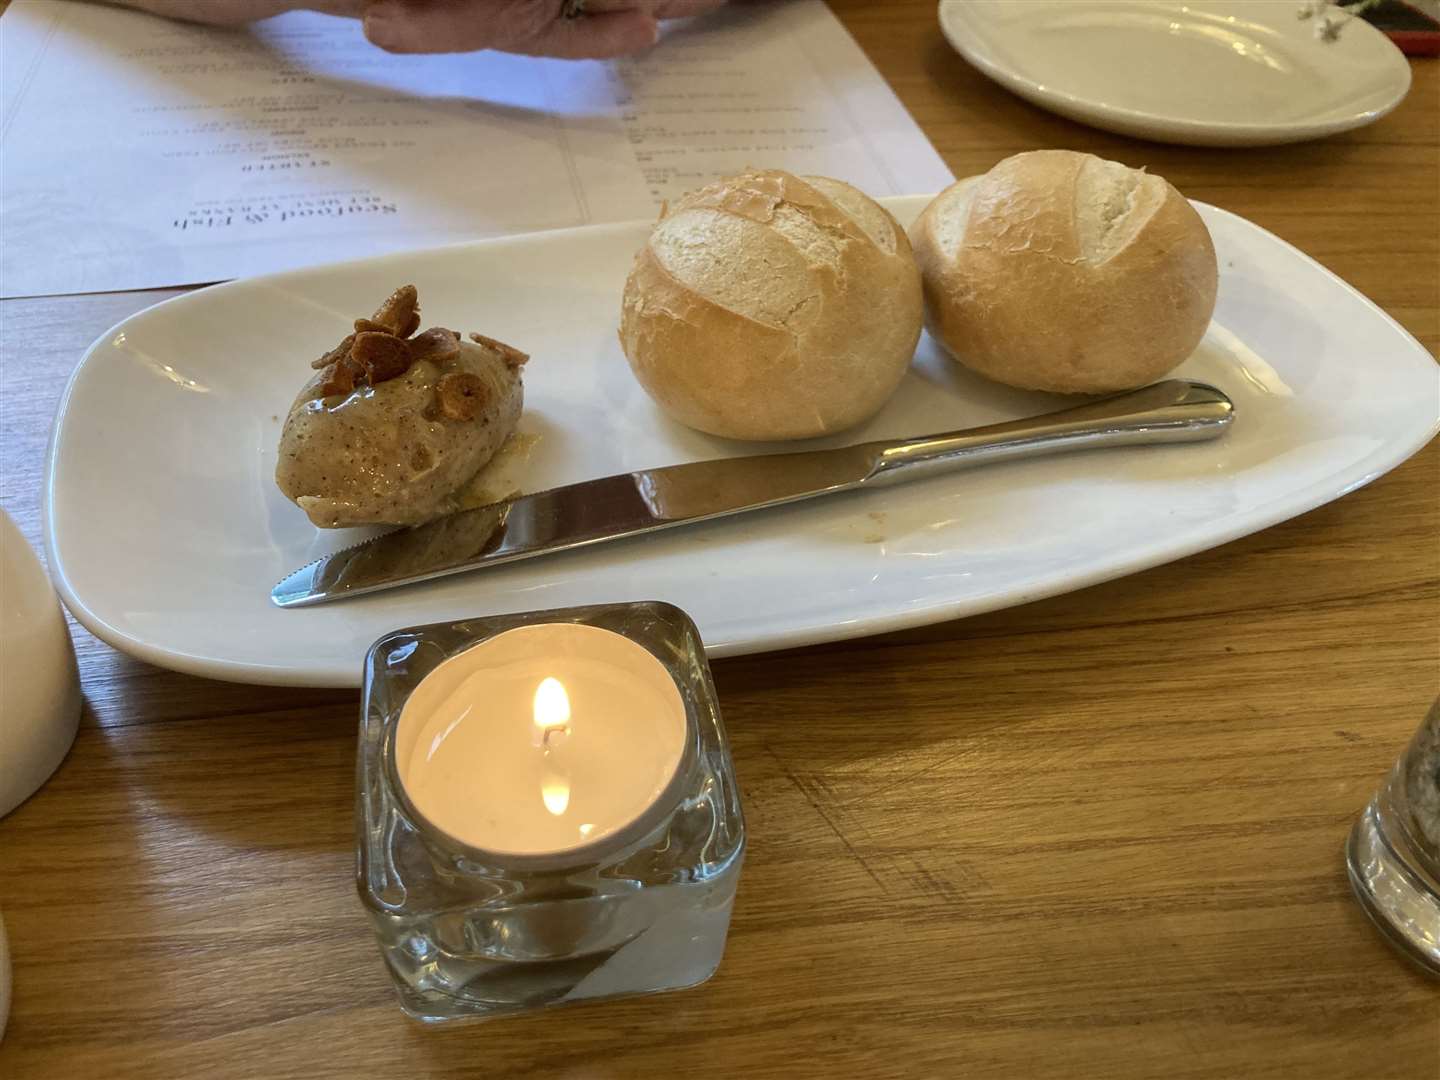 A nice touch: a flame and home-made bread